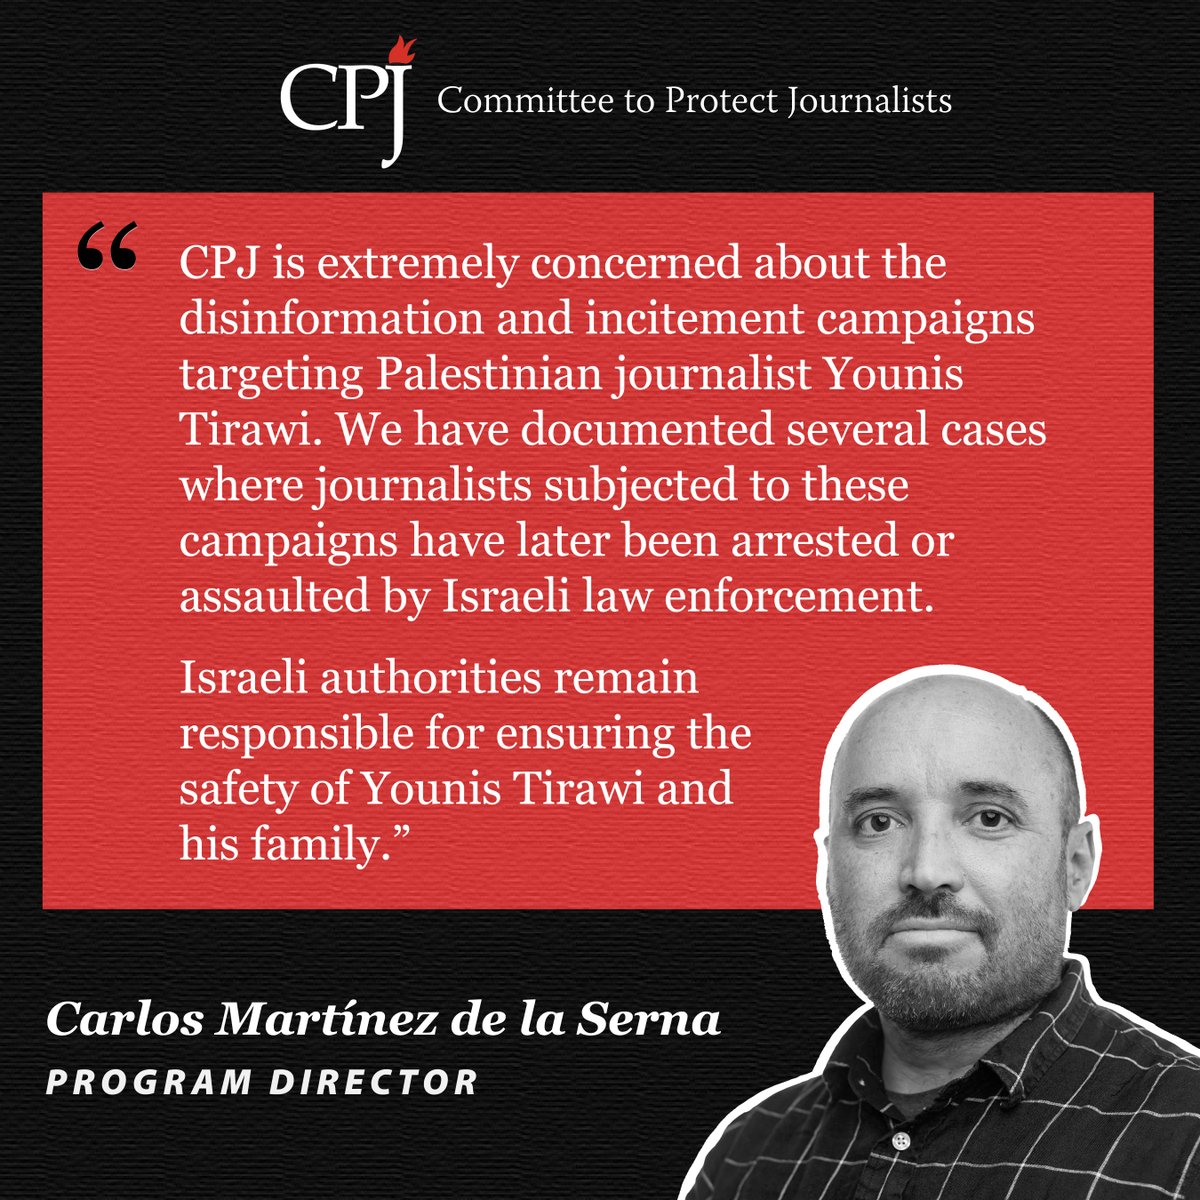 CPJ is extremely concerned about the disinformation and incitement campaigns targeting Palestinian journalist Younis Tirawi. We have documented several cases where journalists subjected to these campaigns have later been arrested or assaulted by Israeli law enforcement. Israeli…